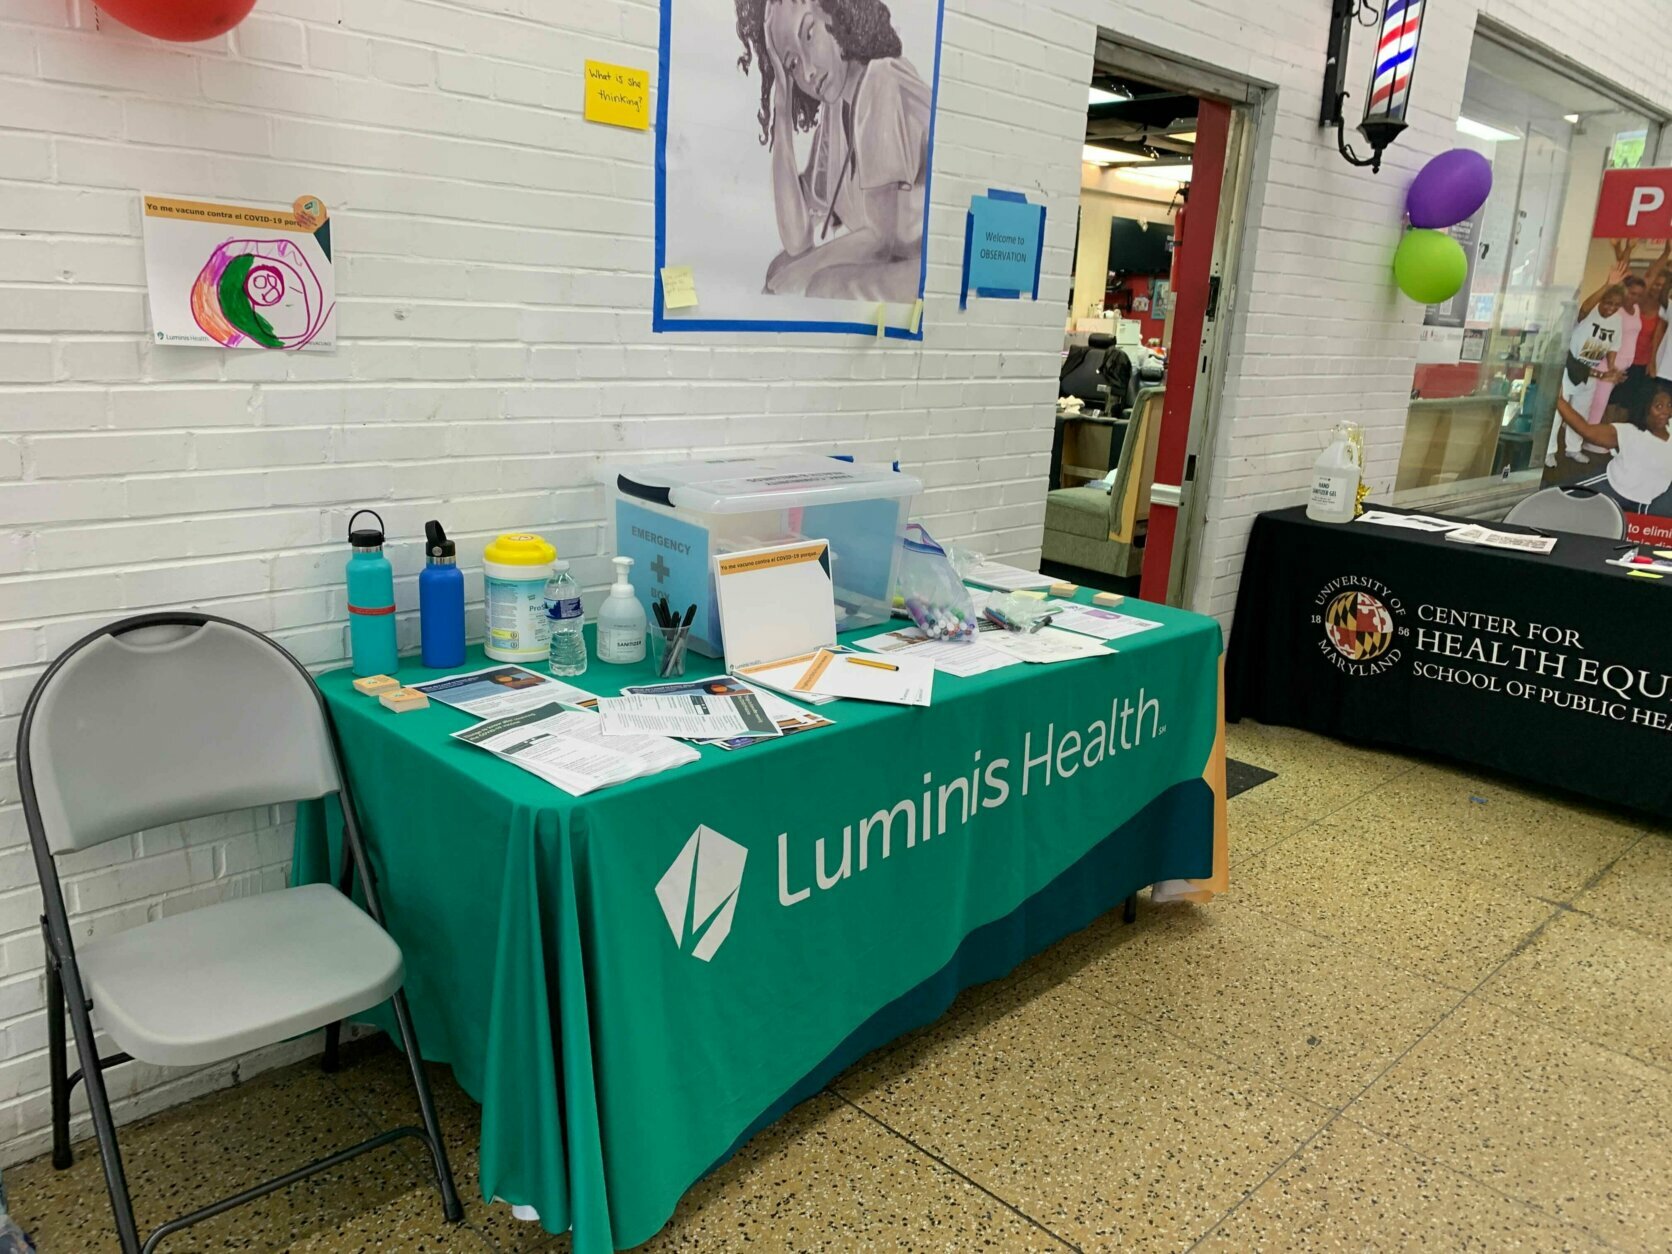 Table with Luminis Health logo.